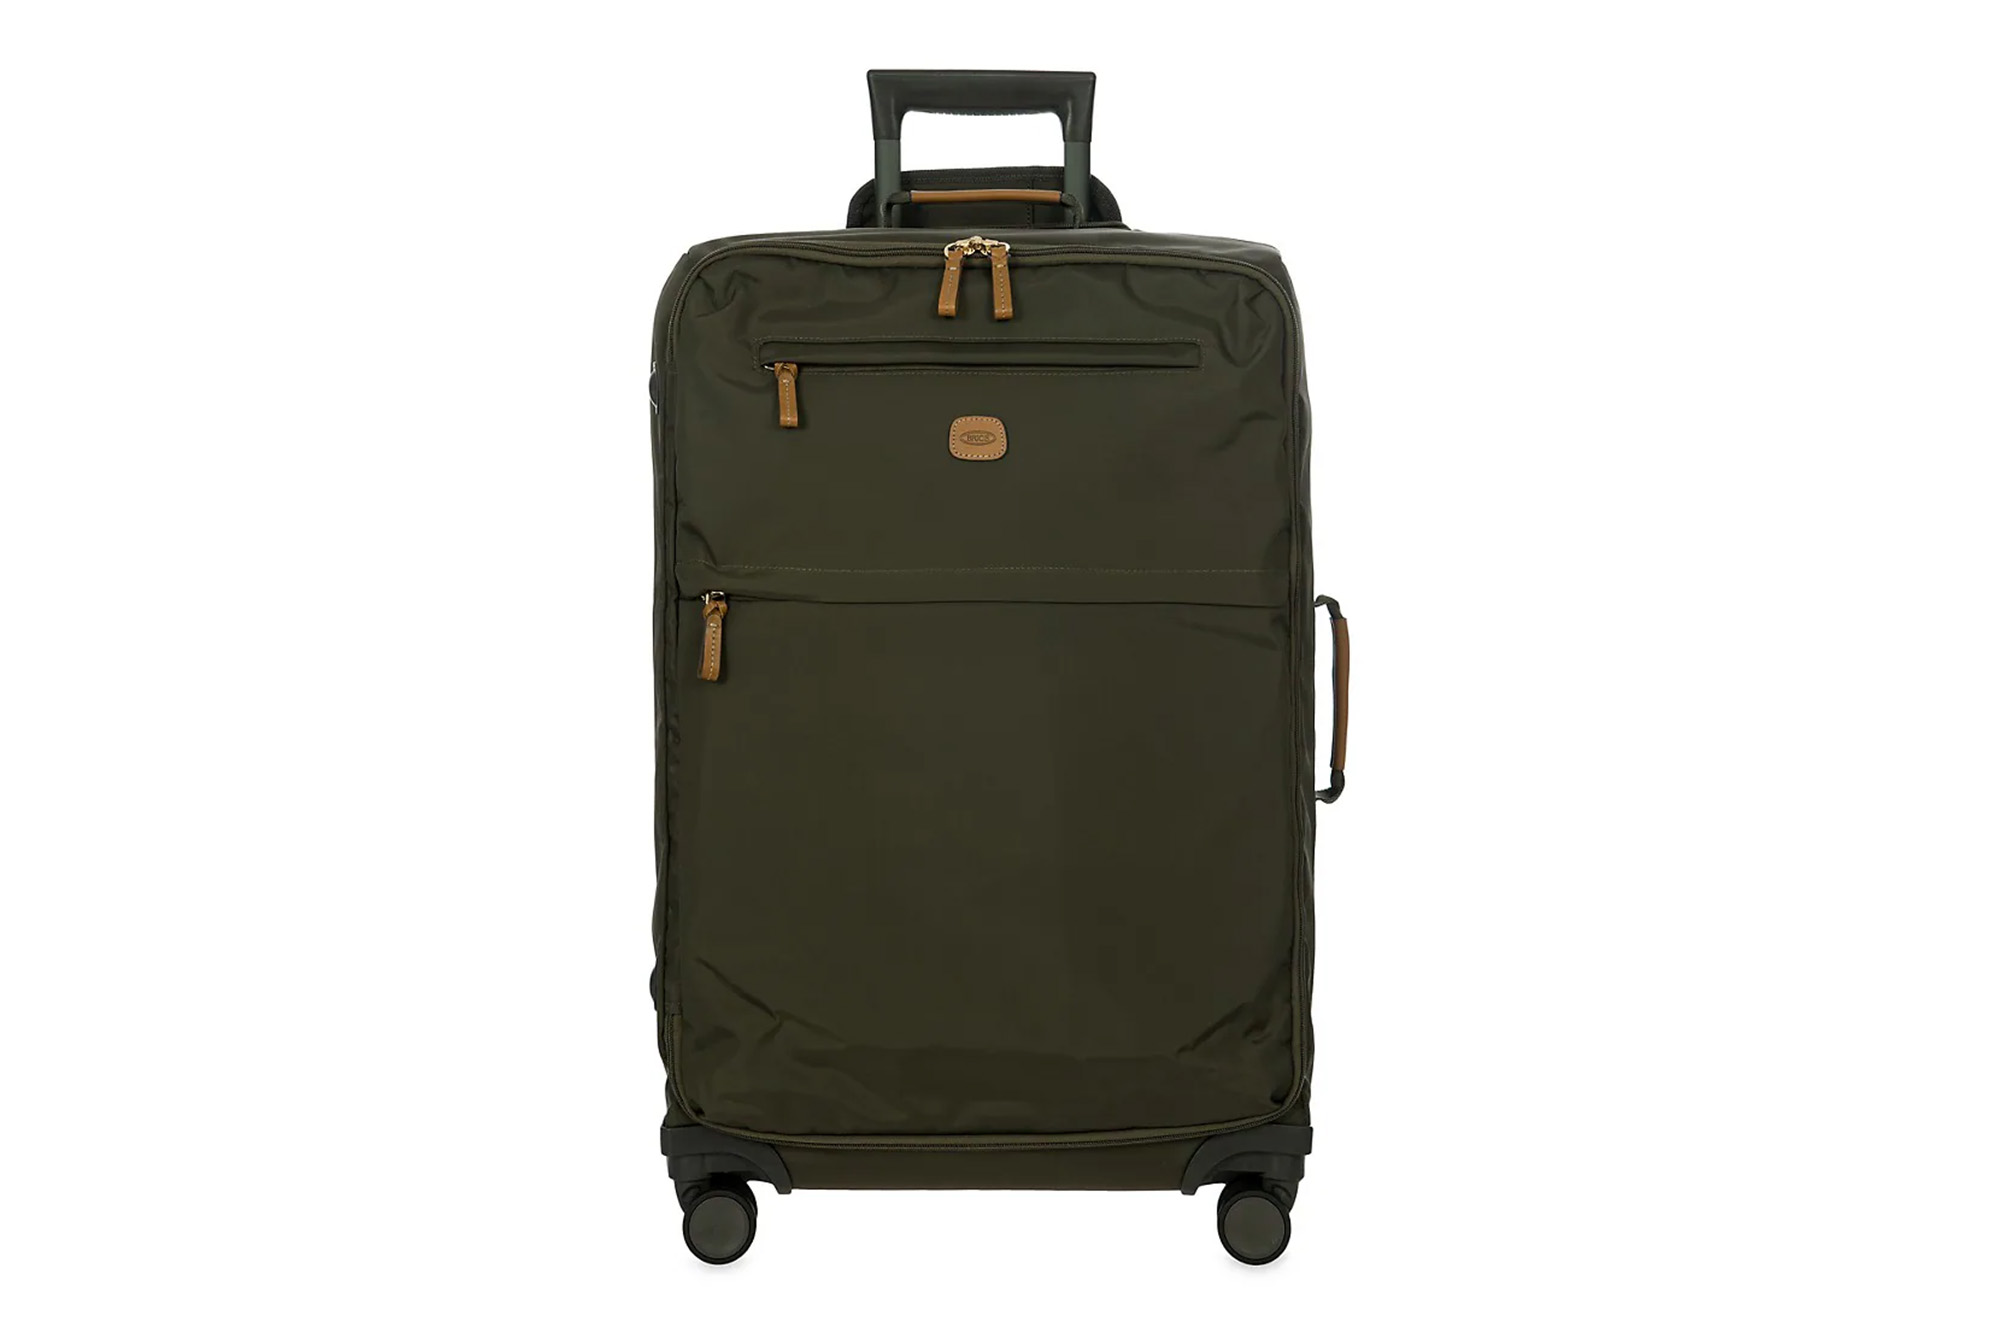 An army green suitcase